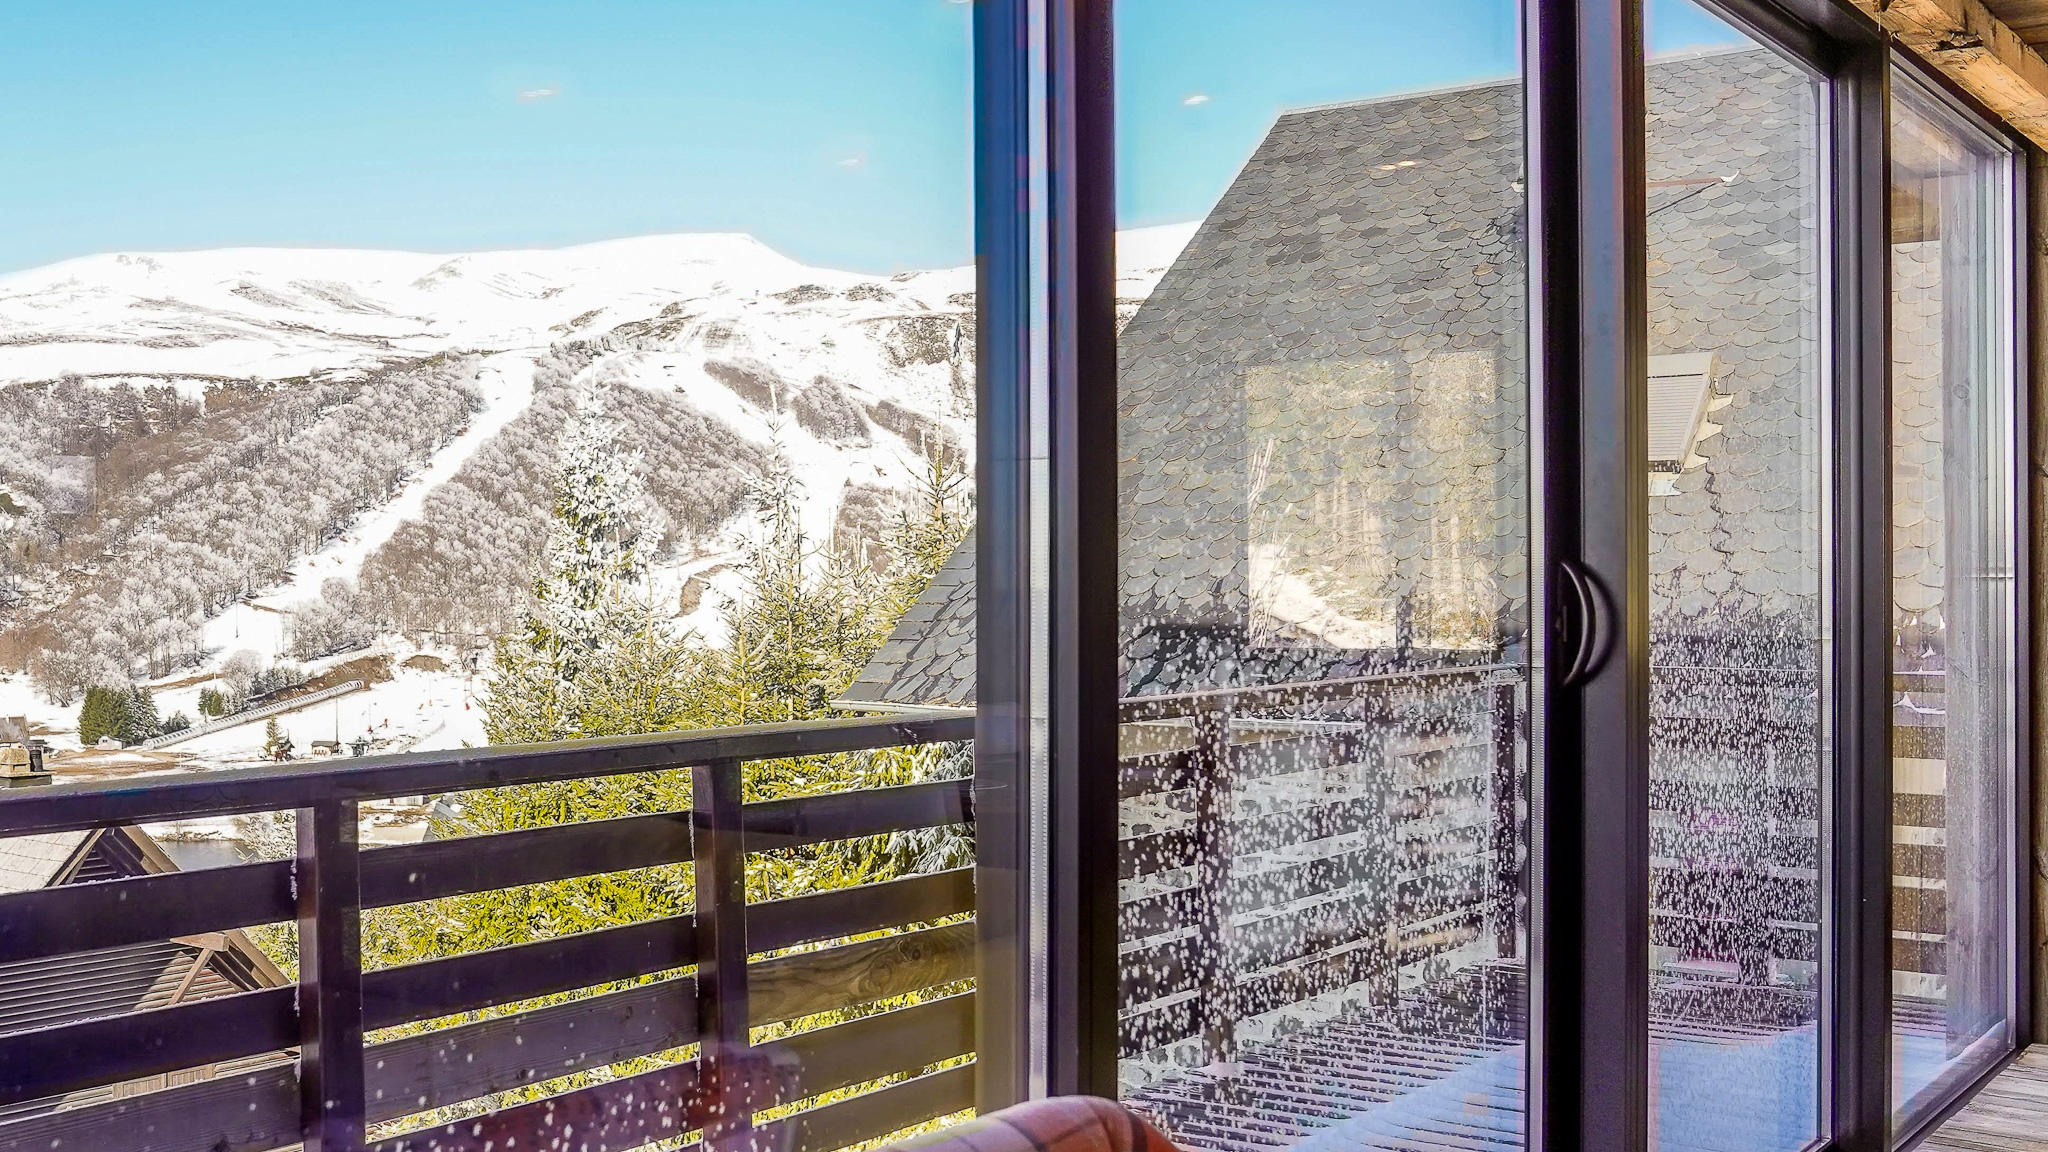 Chalet l'Anorak, the view of the ski slopes of the Super Besse resort